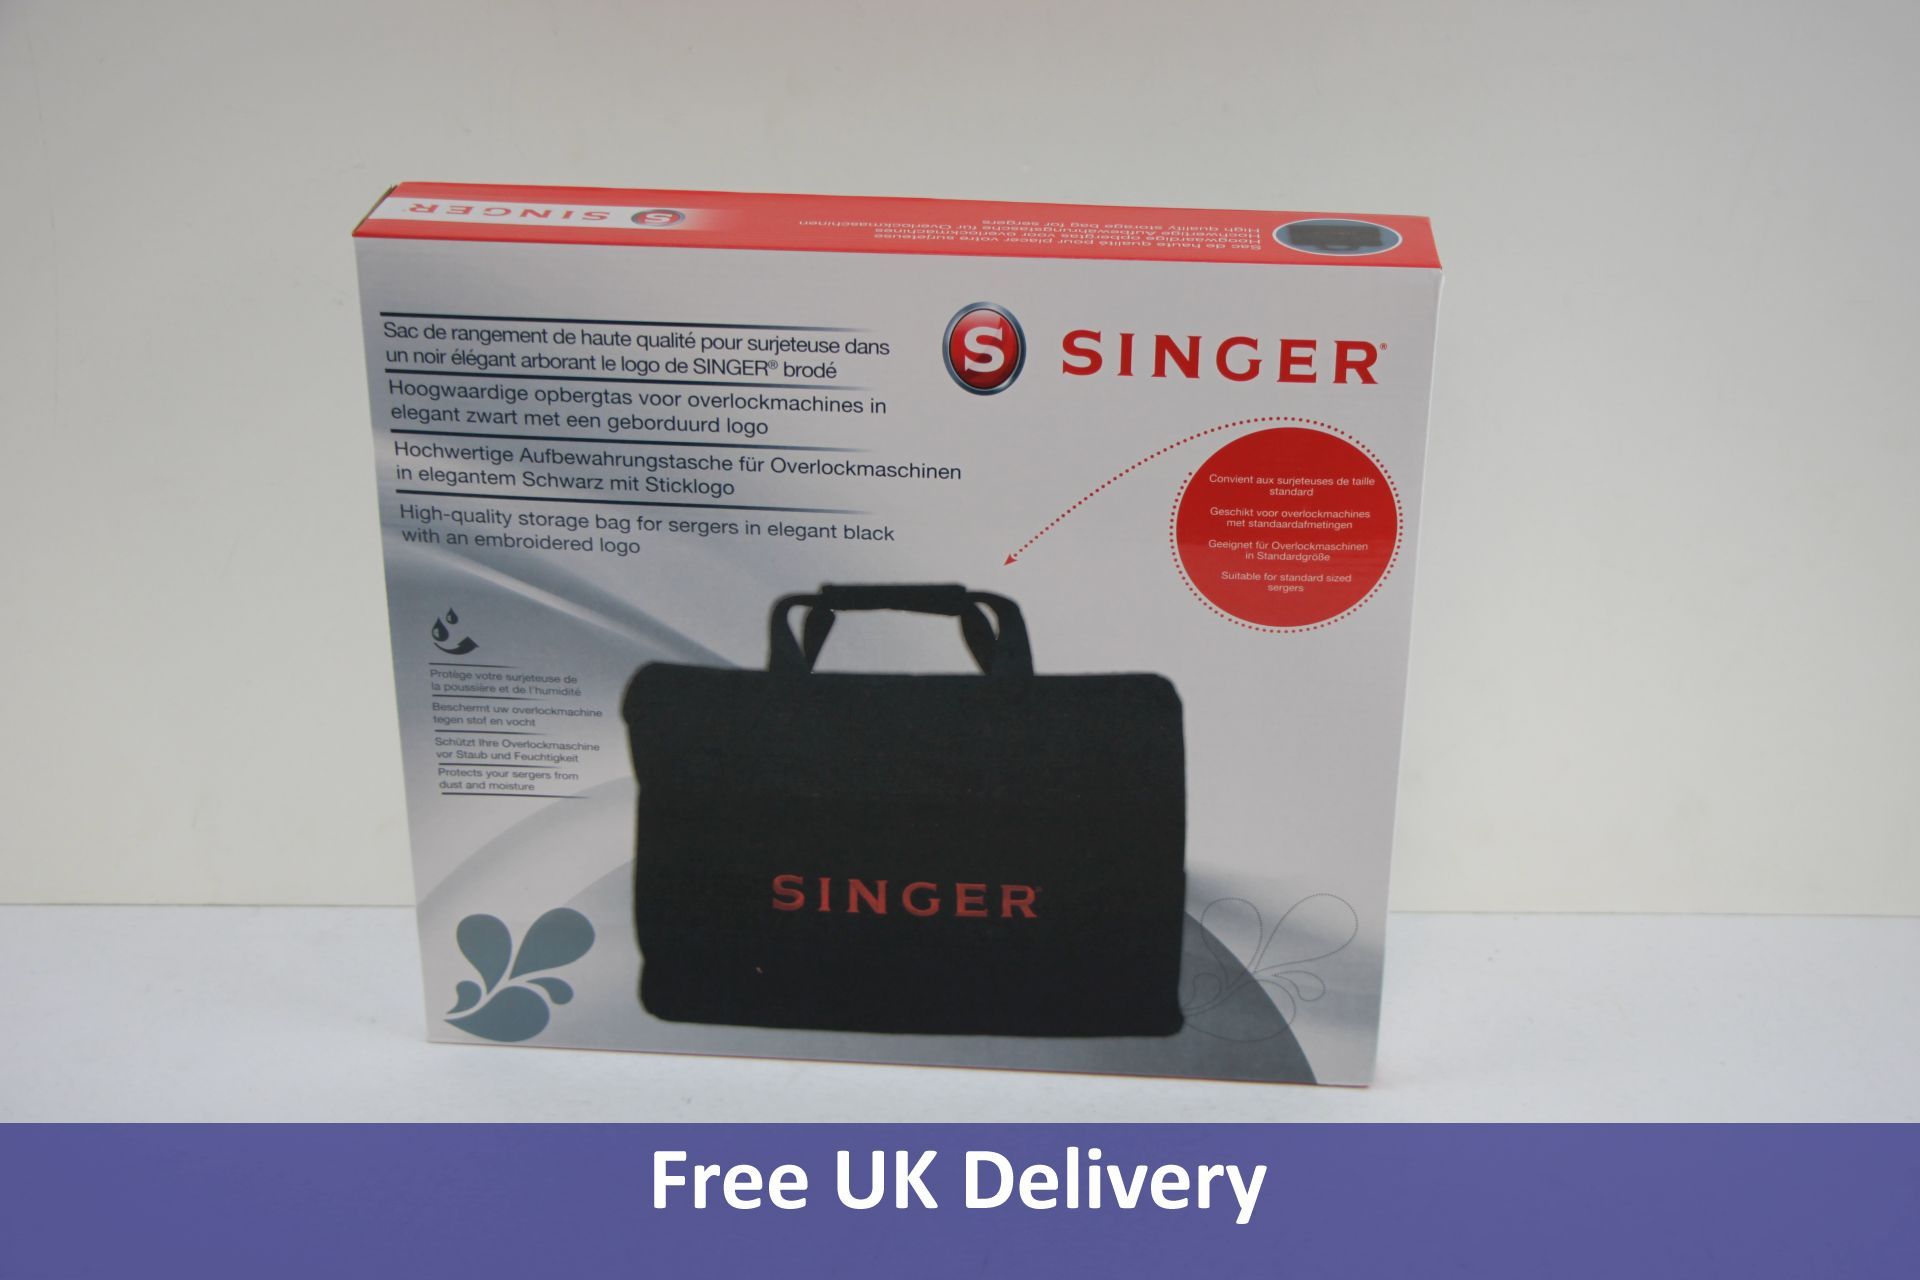 Six Singer Original Extra Strong 600D Nylon Sewing Machine Bags